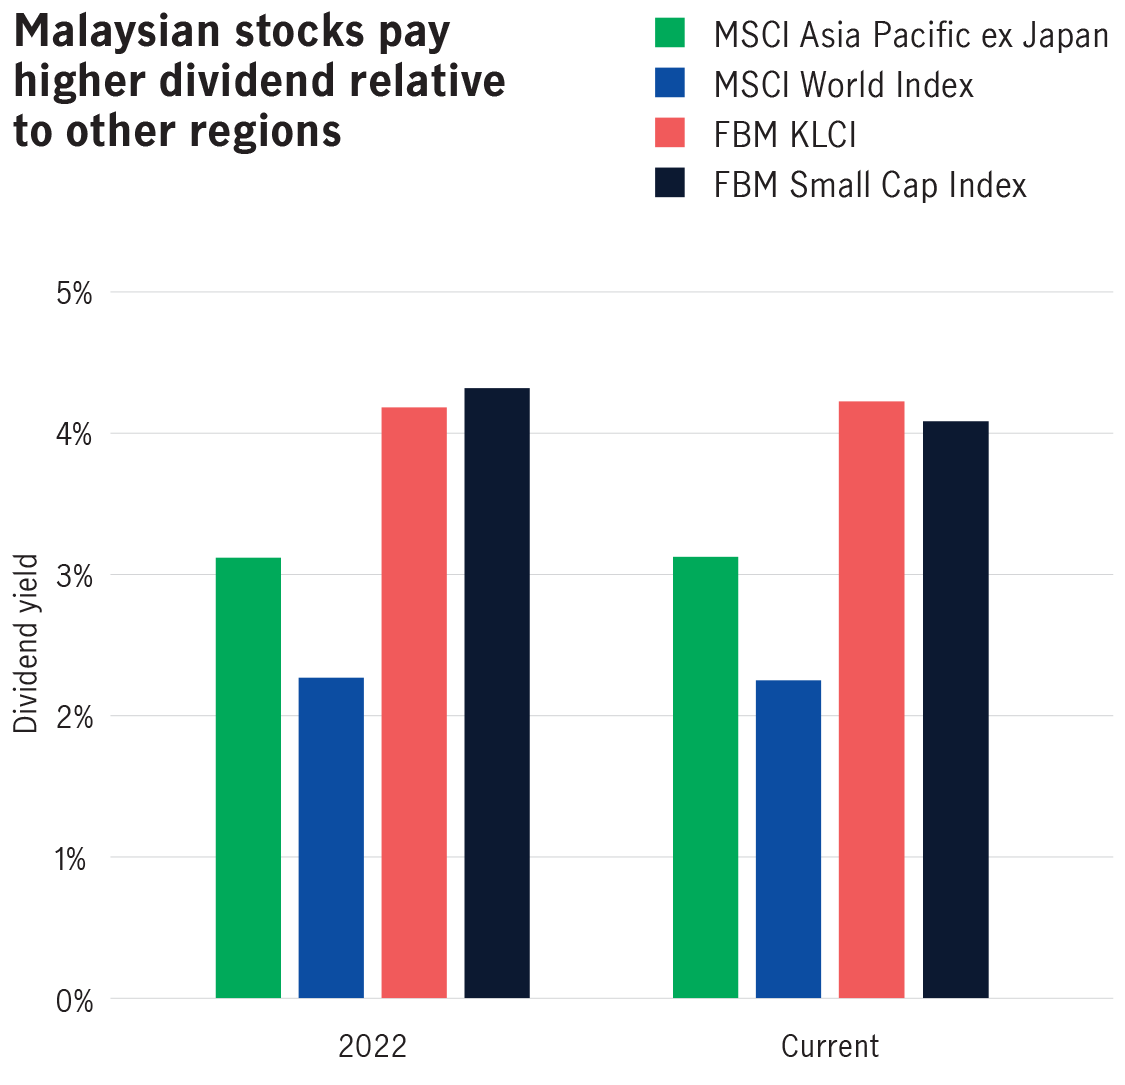 Malaysian stocks pay higher dividend relative to other regions